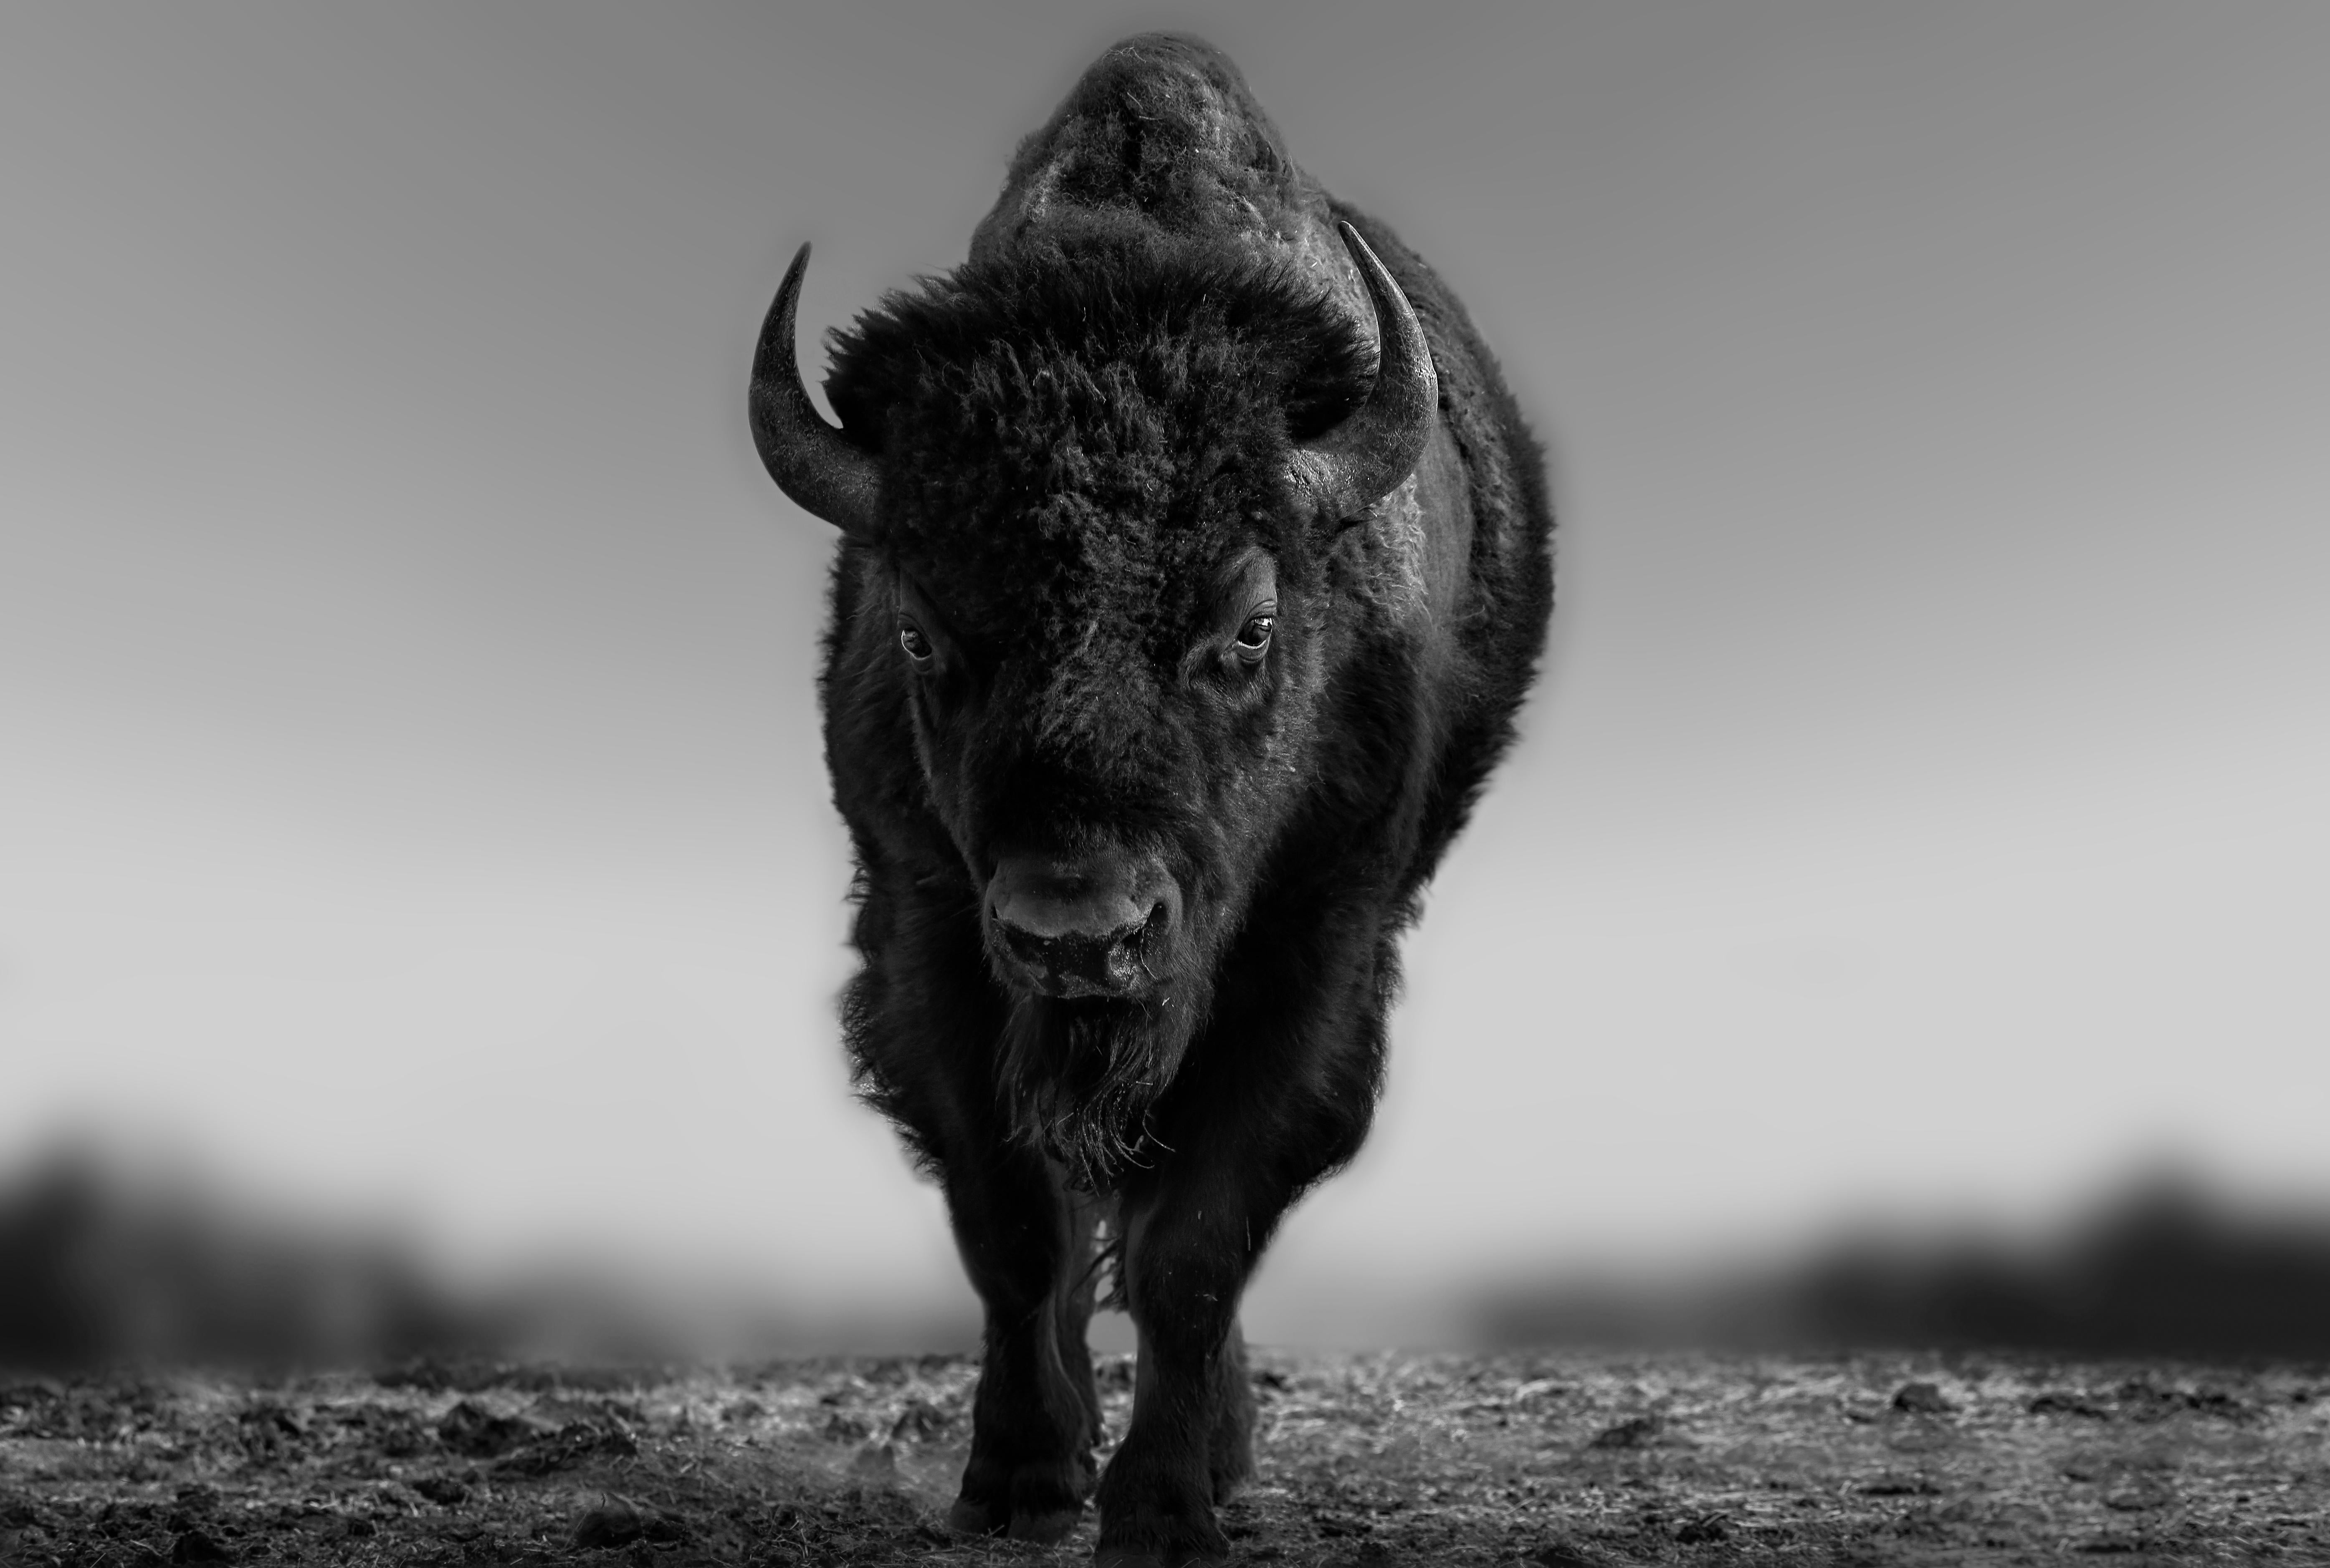 Shane Russeck Animal Print - "The Beast" 50x60 -  Black and White Photography of Bison, Buffalo Photograph